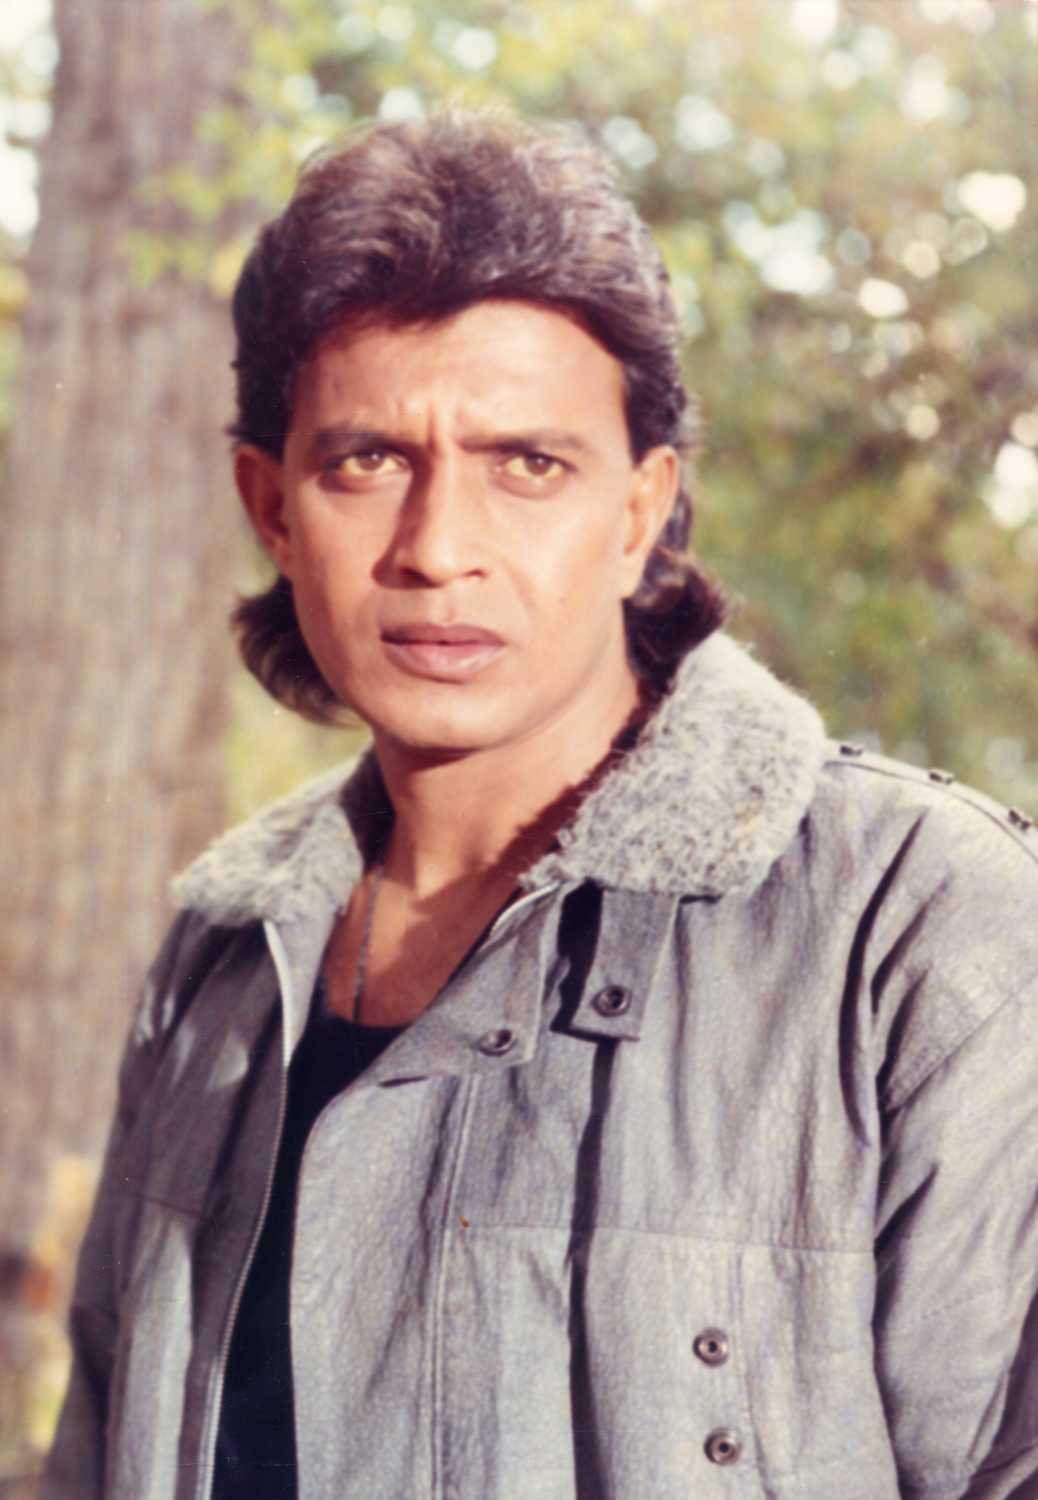 Mithun Chakraborty (Indian Actor) - Age, Height, Net Worth, Biography